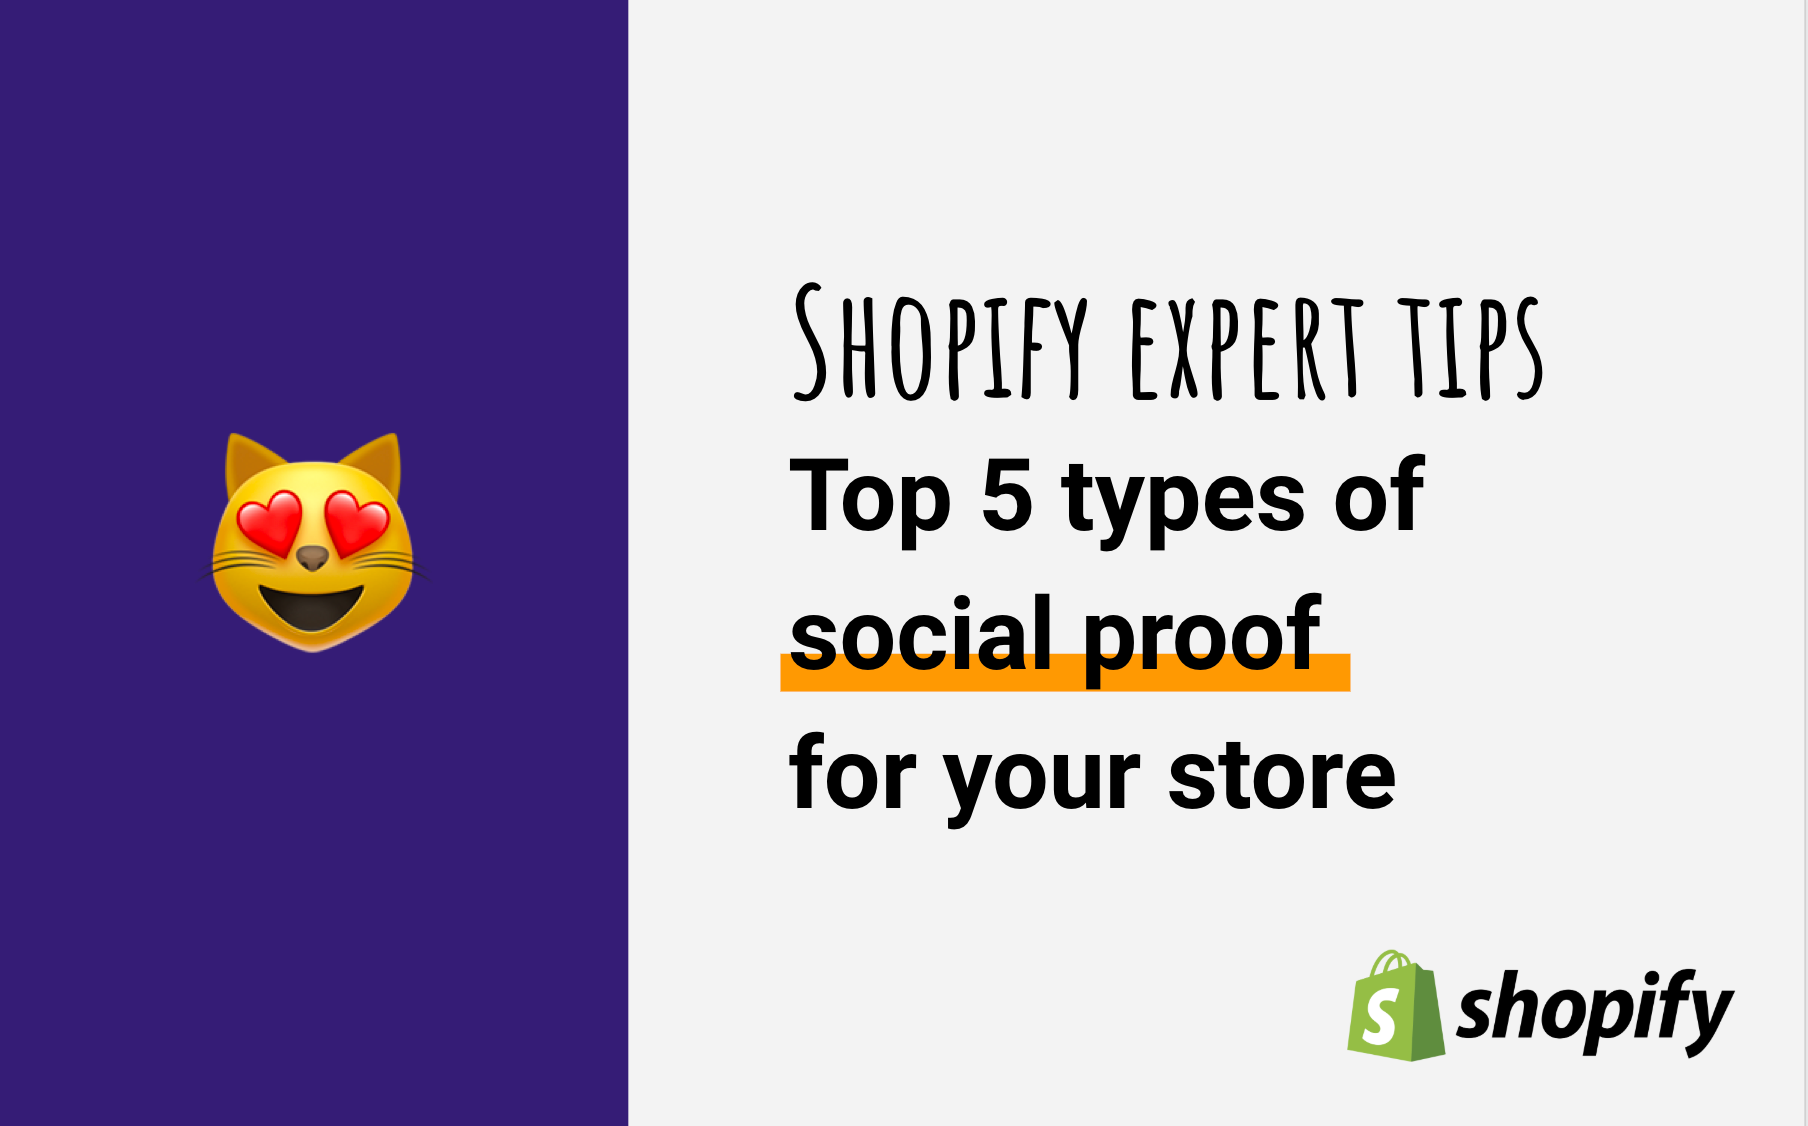 Shopify Expert Tips: Top 5 types of social proof / FOMO for your store